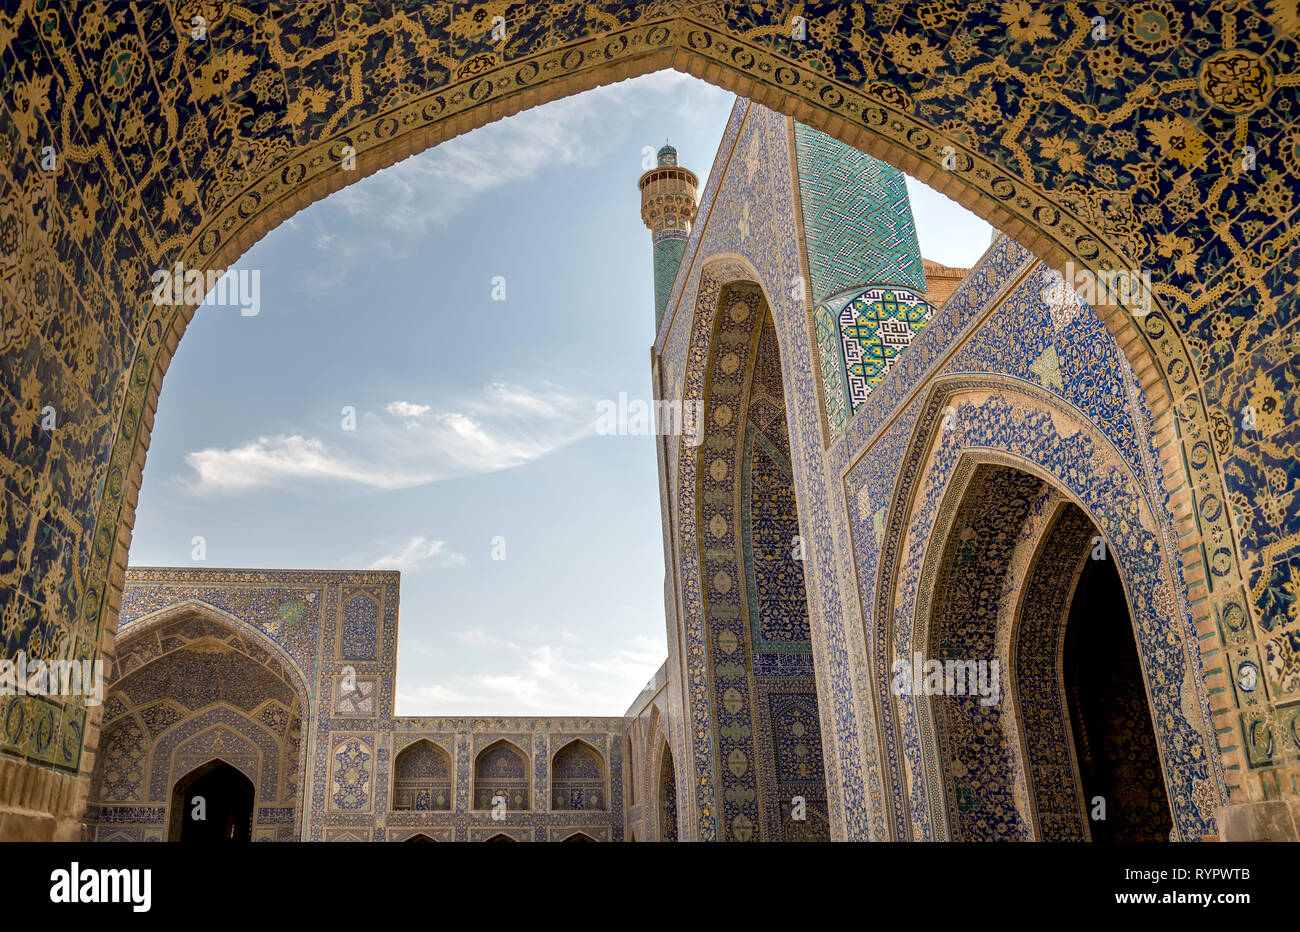 View of New Shah Abbas Mosque from arcade to courtyard with madrasa and iwan, Esfahan, Iran Stock Photo